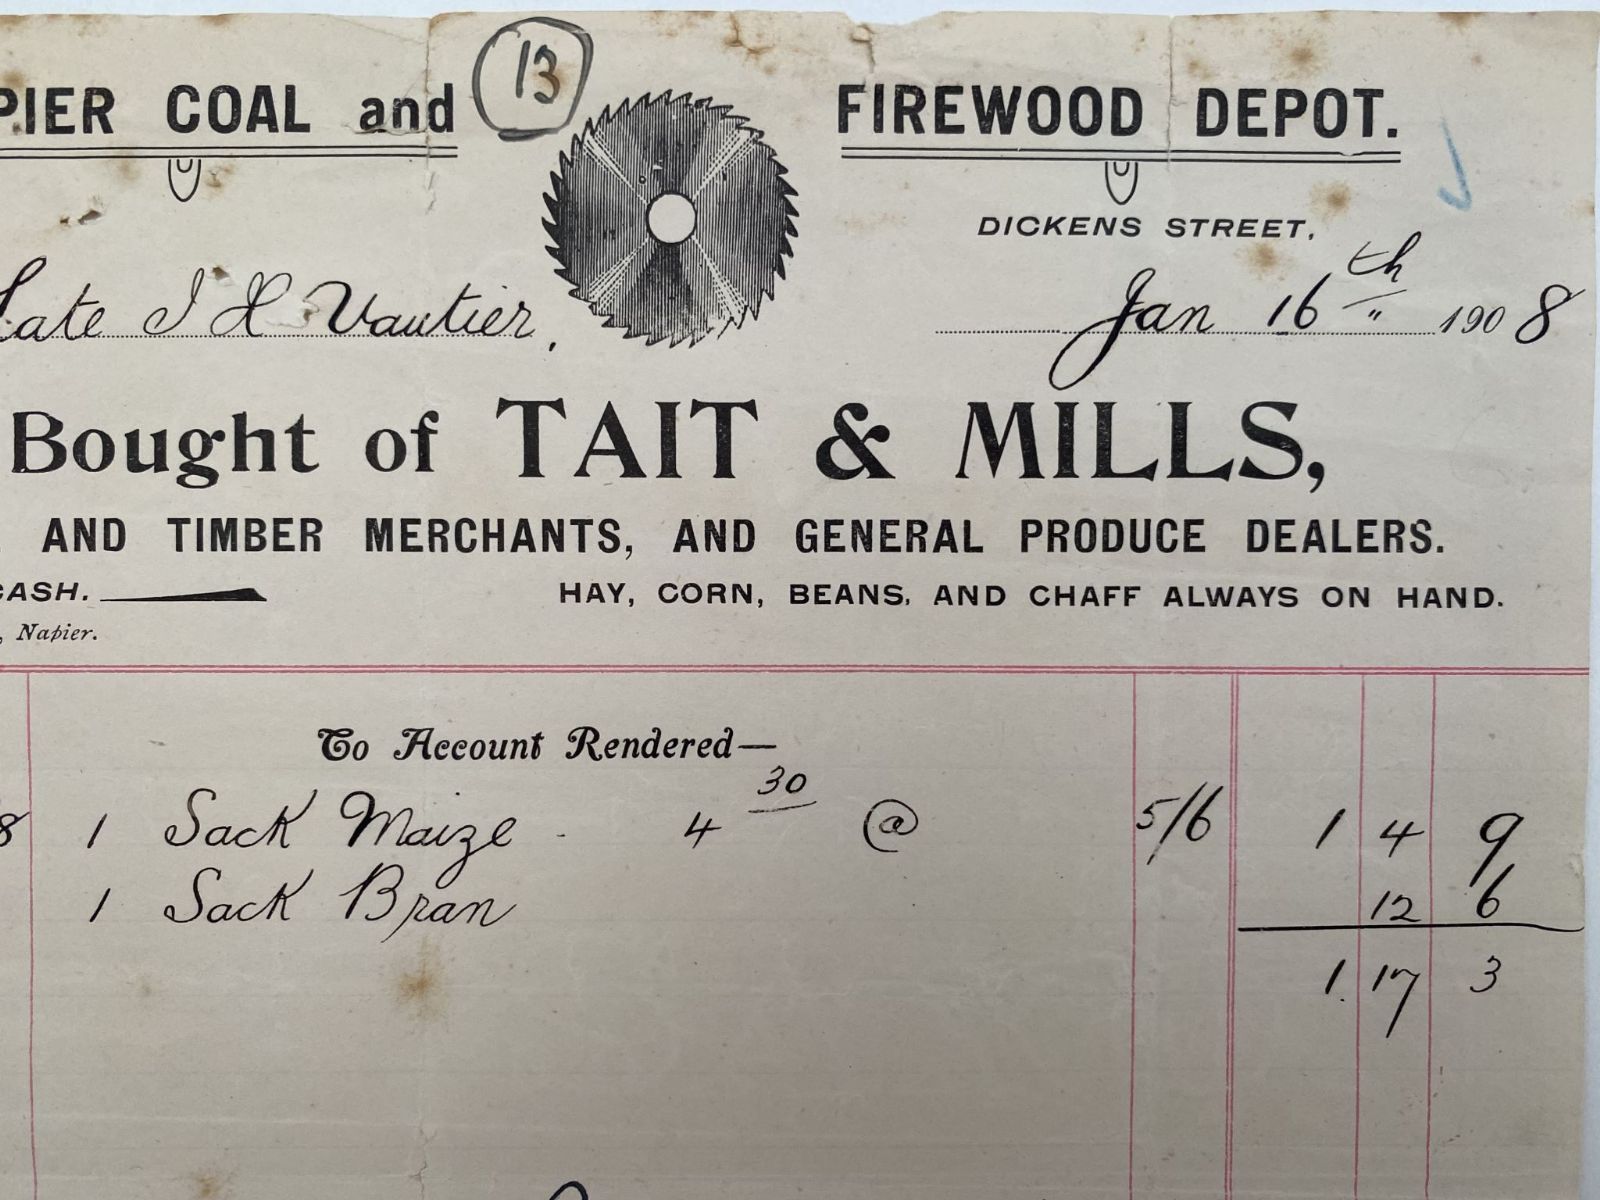 ANTIQUE INVOICE / RECEIPT: Tait and Mills, Coal and Timber 1908